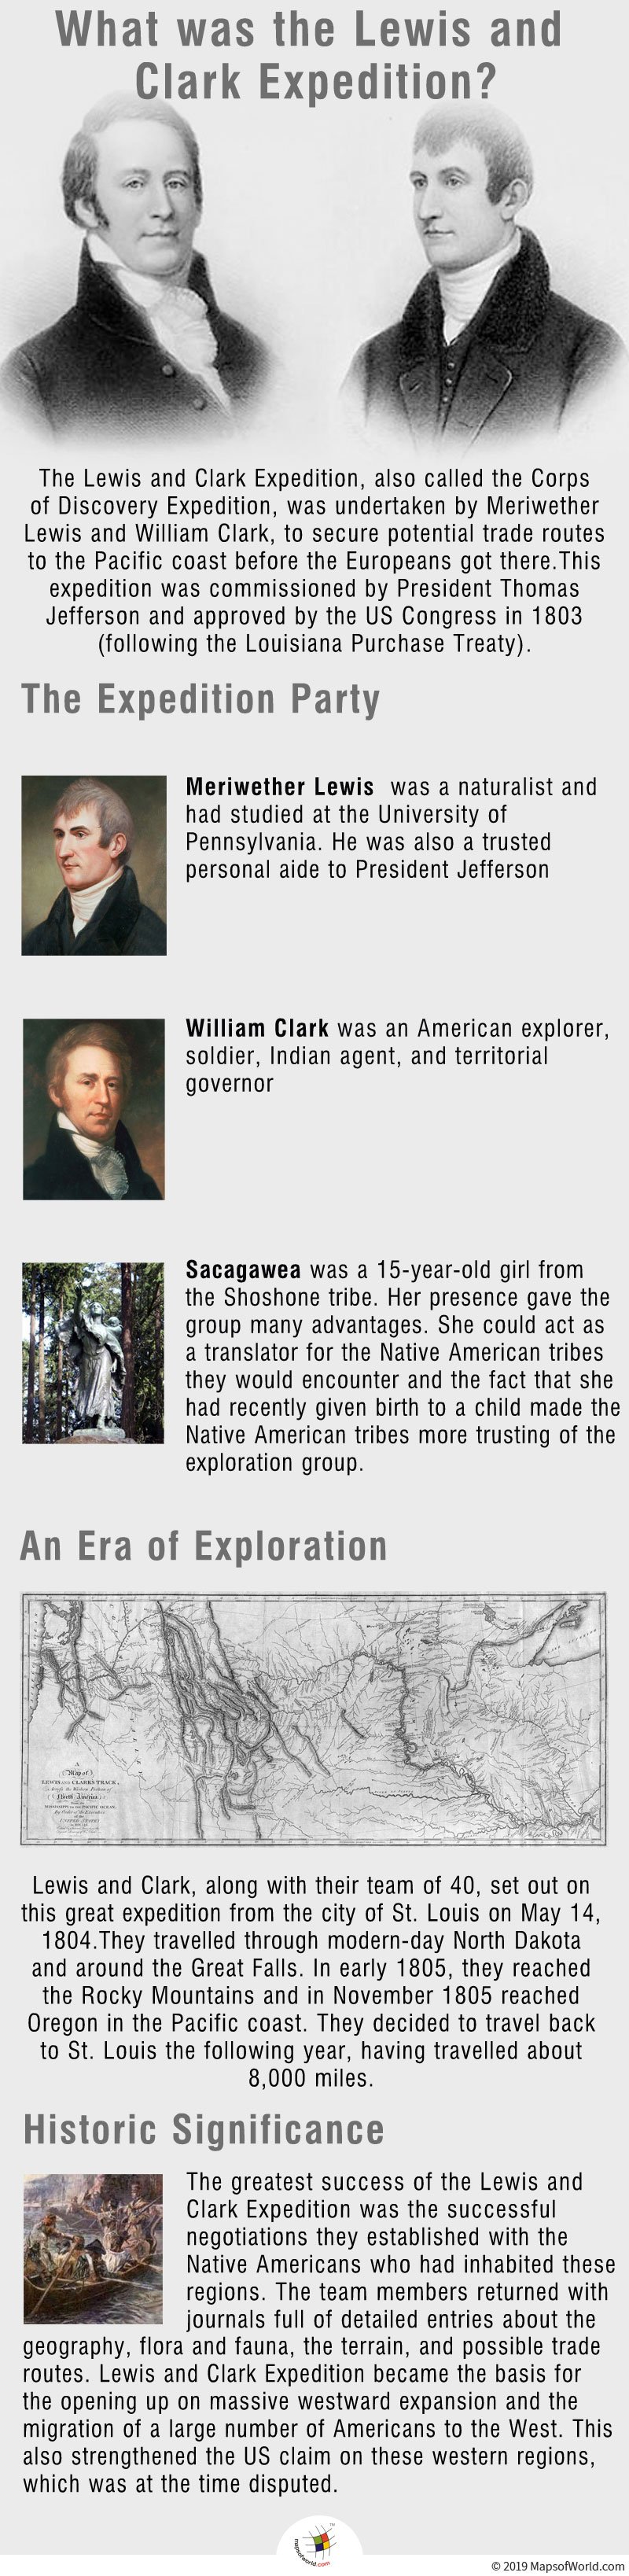 What Was The Lewis And Clark Expedition 